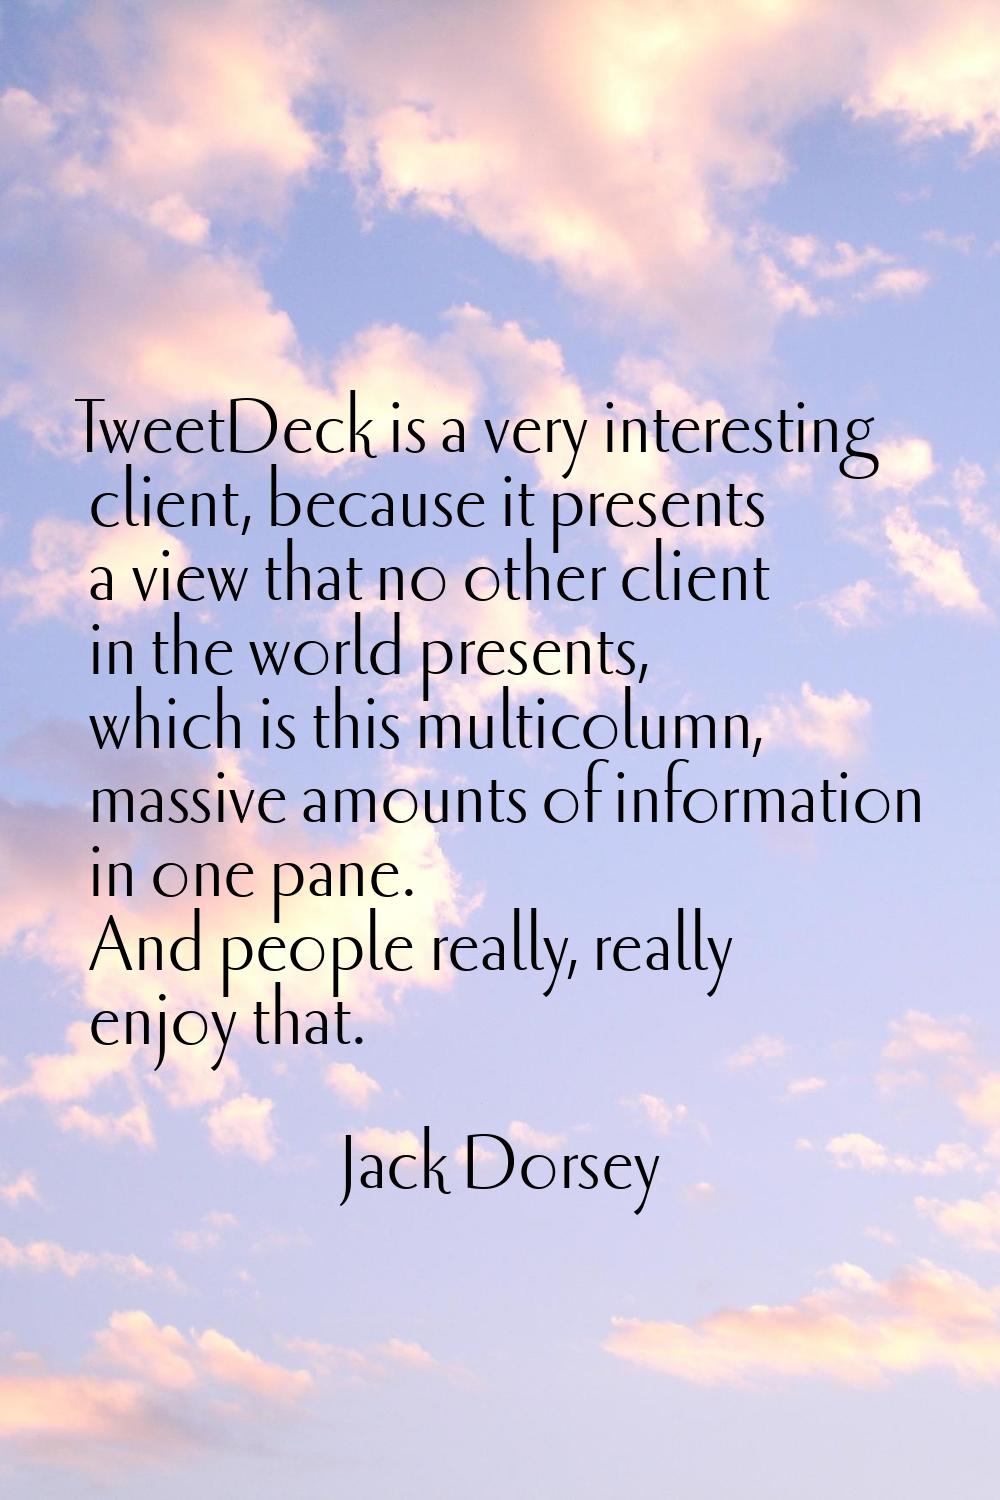 TweetDeck is a very interesting client, because it presents a view that no other client in the worl